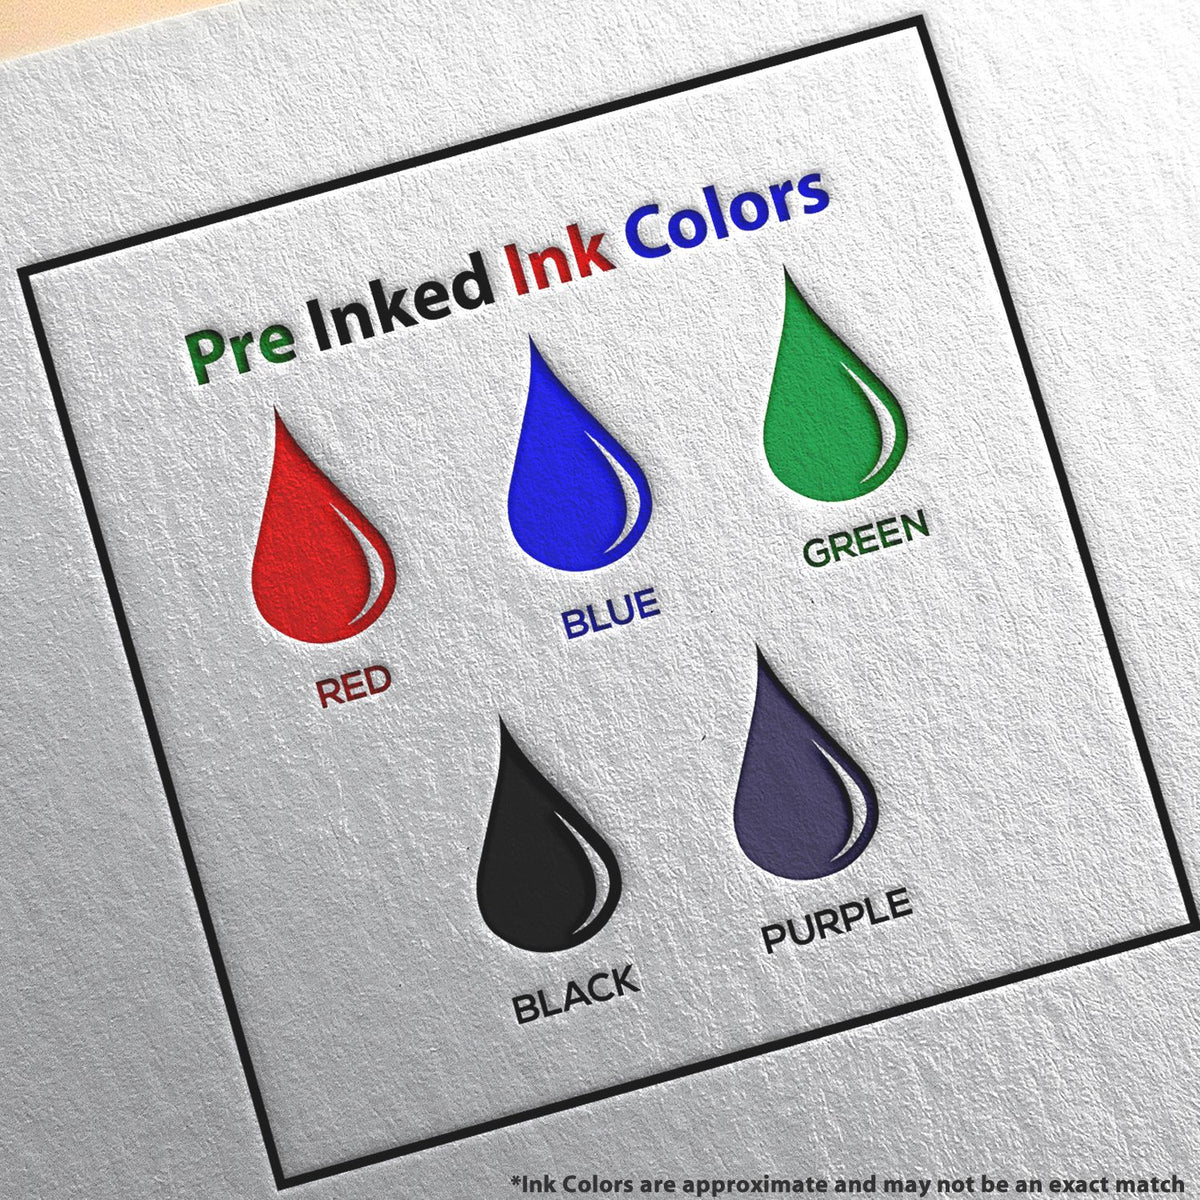 A picture showing the different ink colors or hues available for the Premium MaxLight Pre-Inked Idaho Landscape Architectural Stamp product.